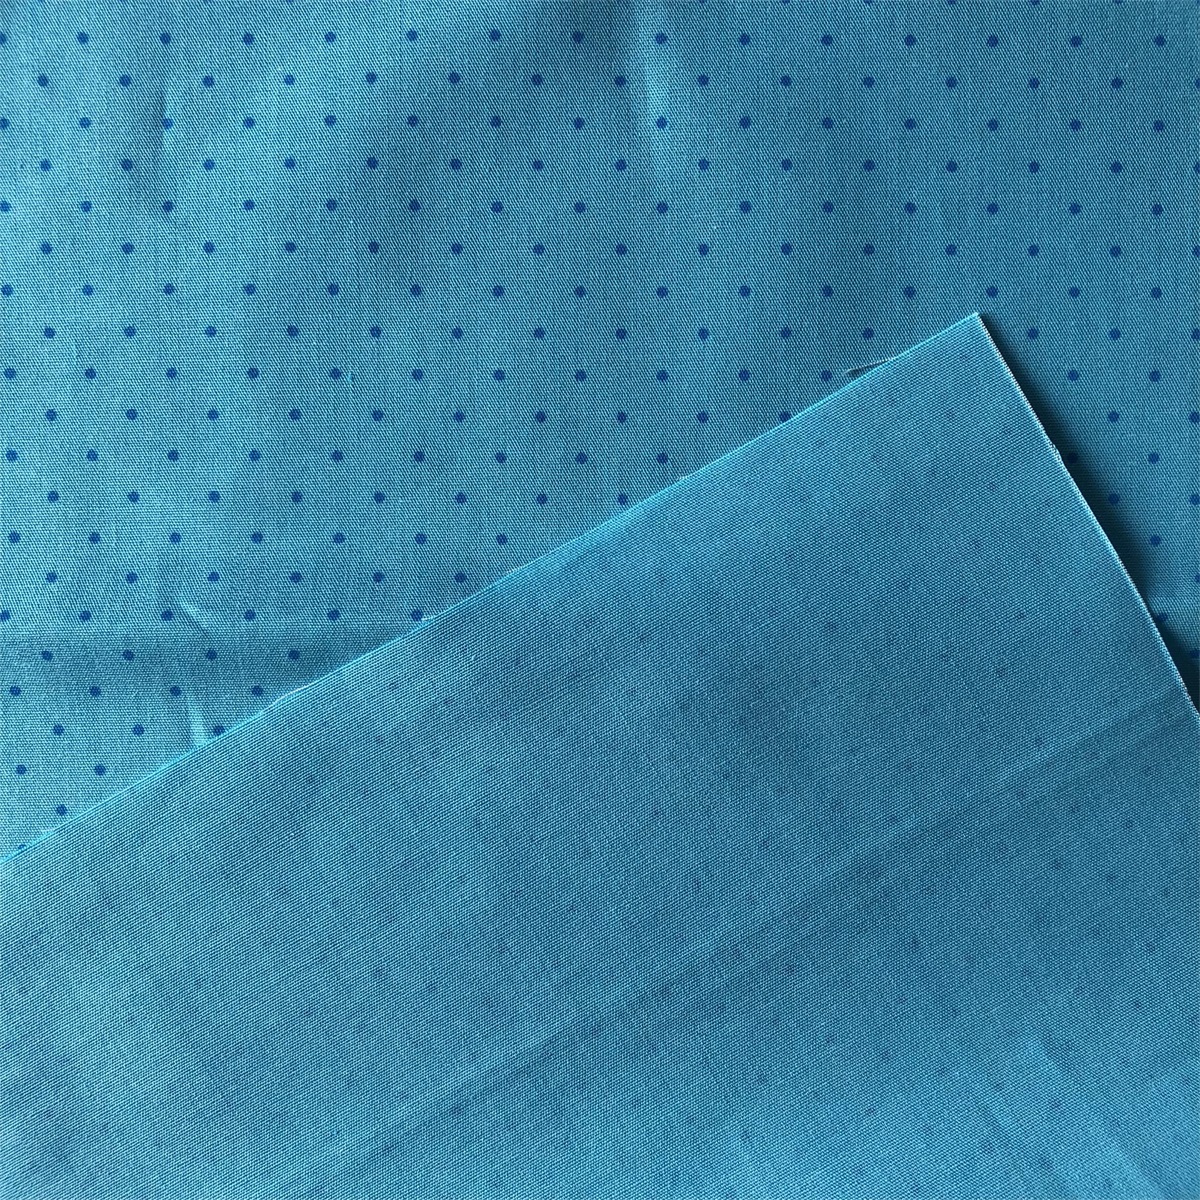 High quality Eco-friendly Cotton Fabric for men's shirts 100% cotton printed on yarn dyed chambray plain woven shirts fabric